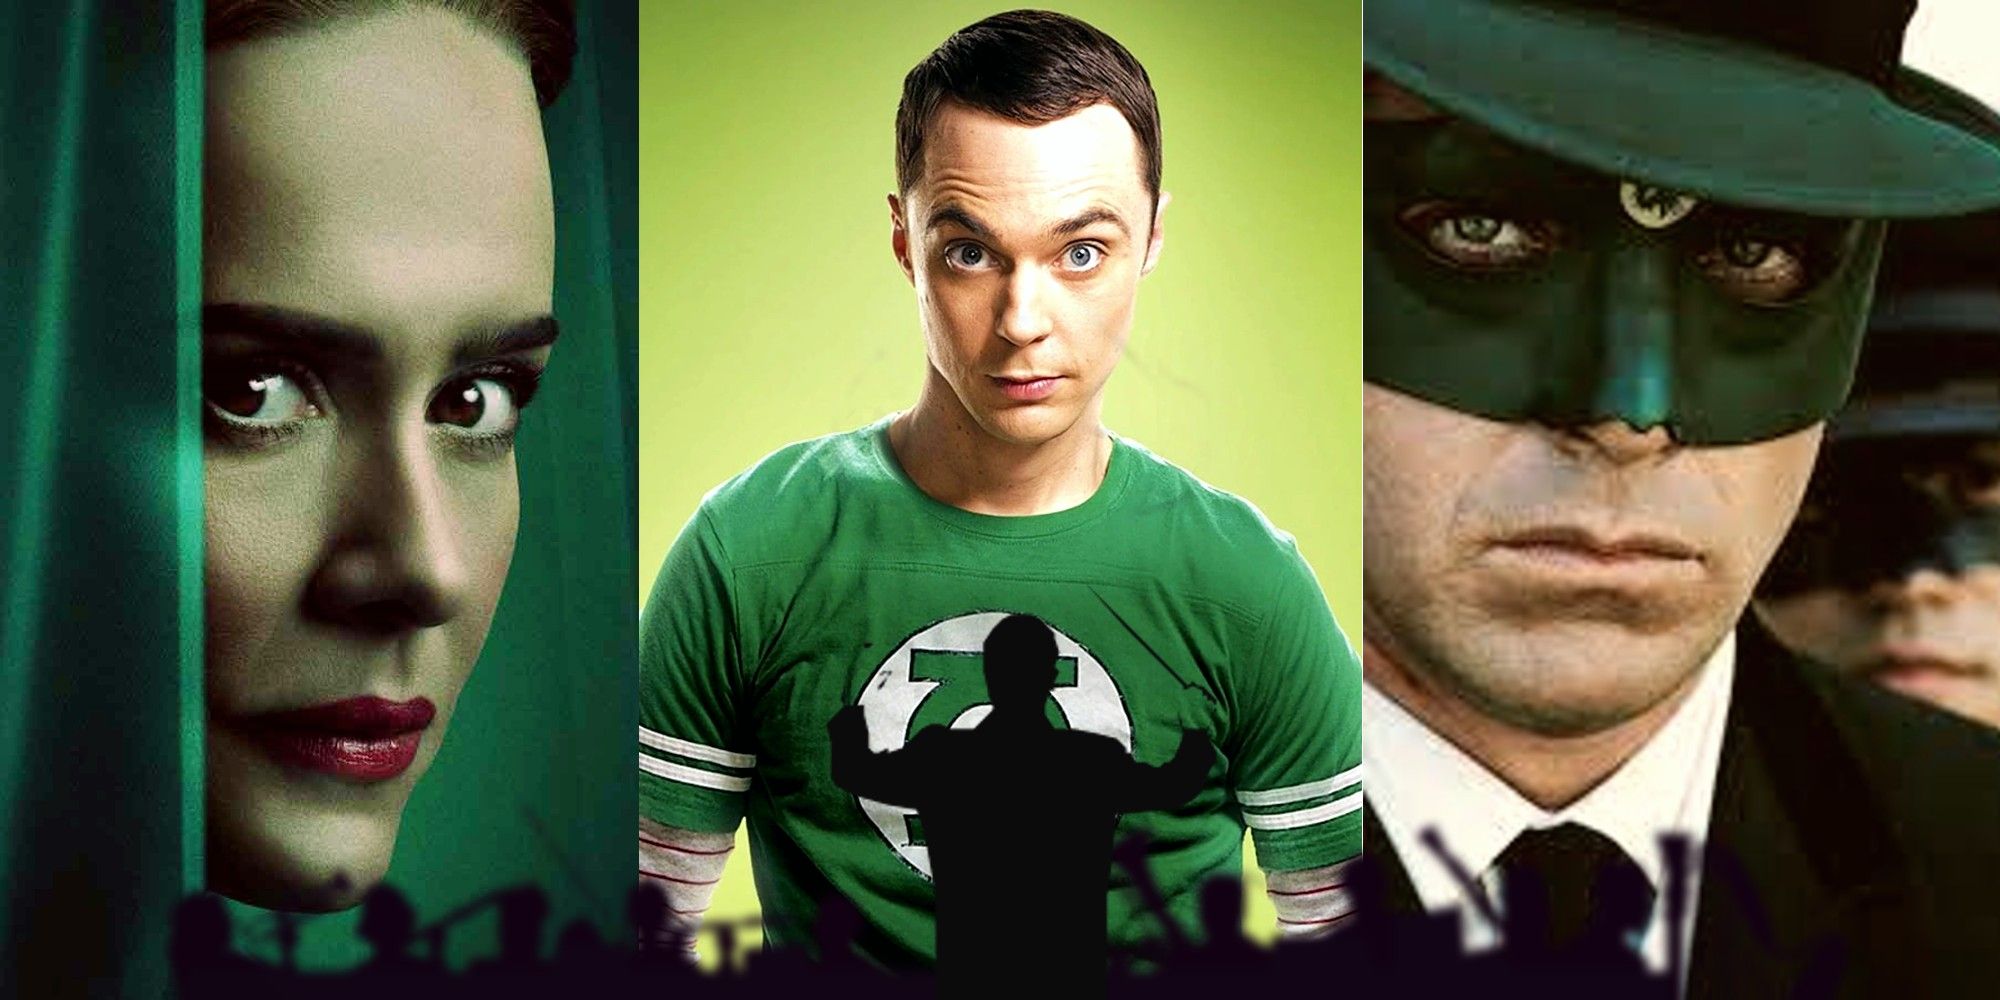 Ratched, The Big Bang Theory and The Green Hornet have examples of great classical music pieces